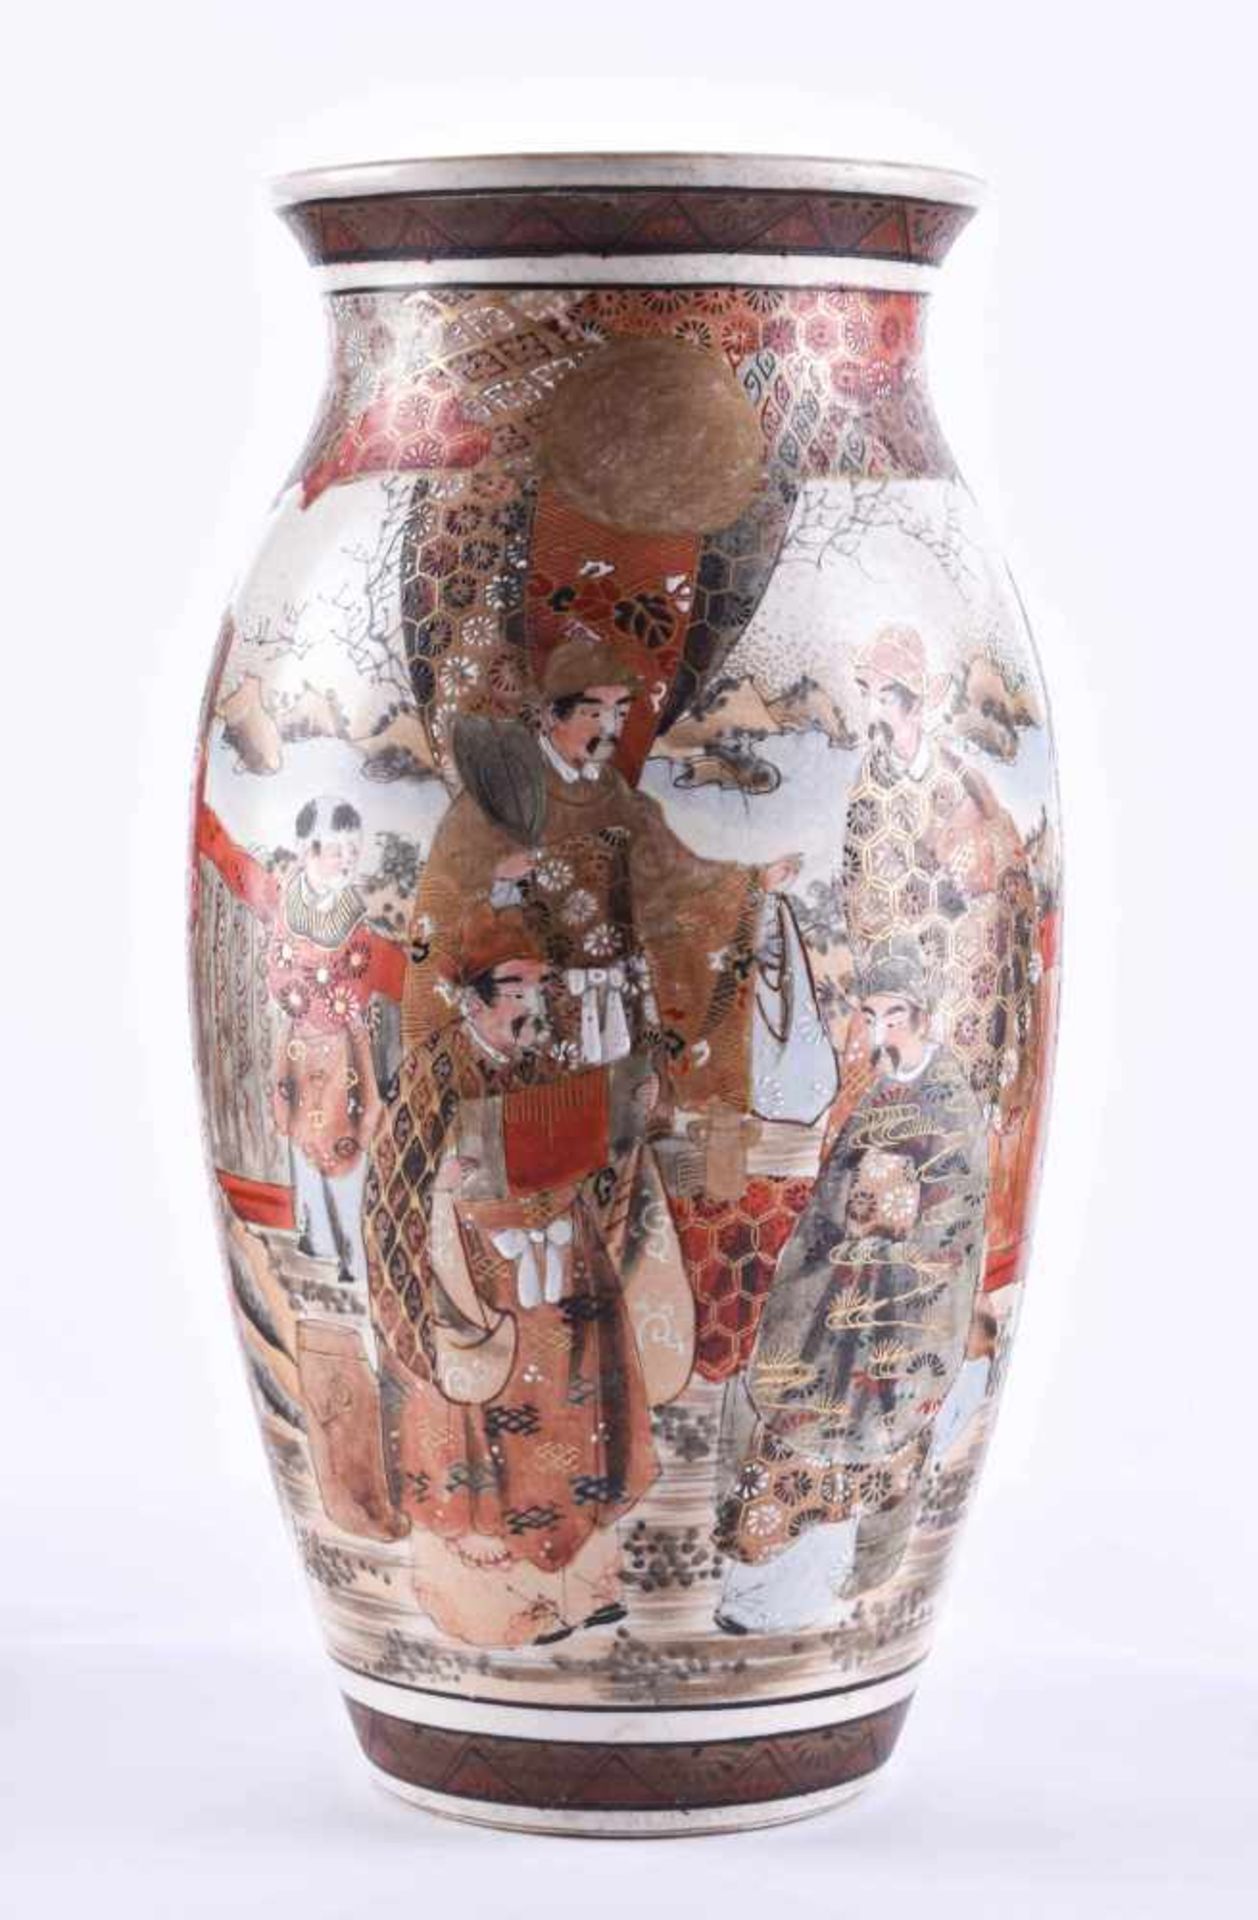 Satsuma vase Japan Meiji periodcolored and gold decorated, circumferentially painted with very